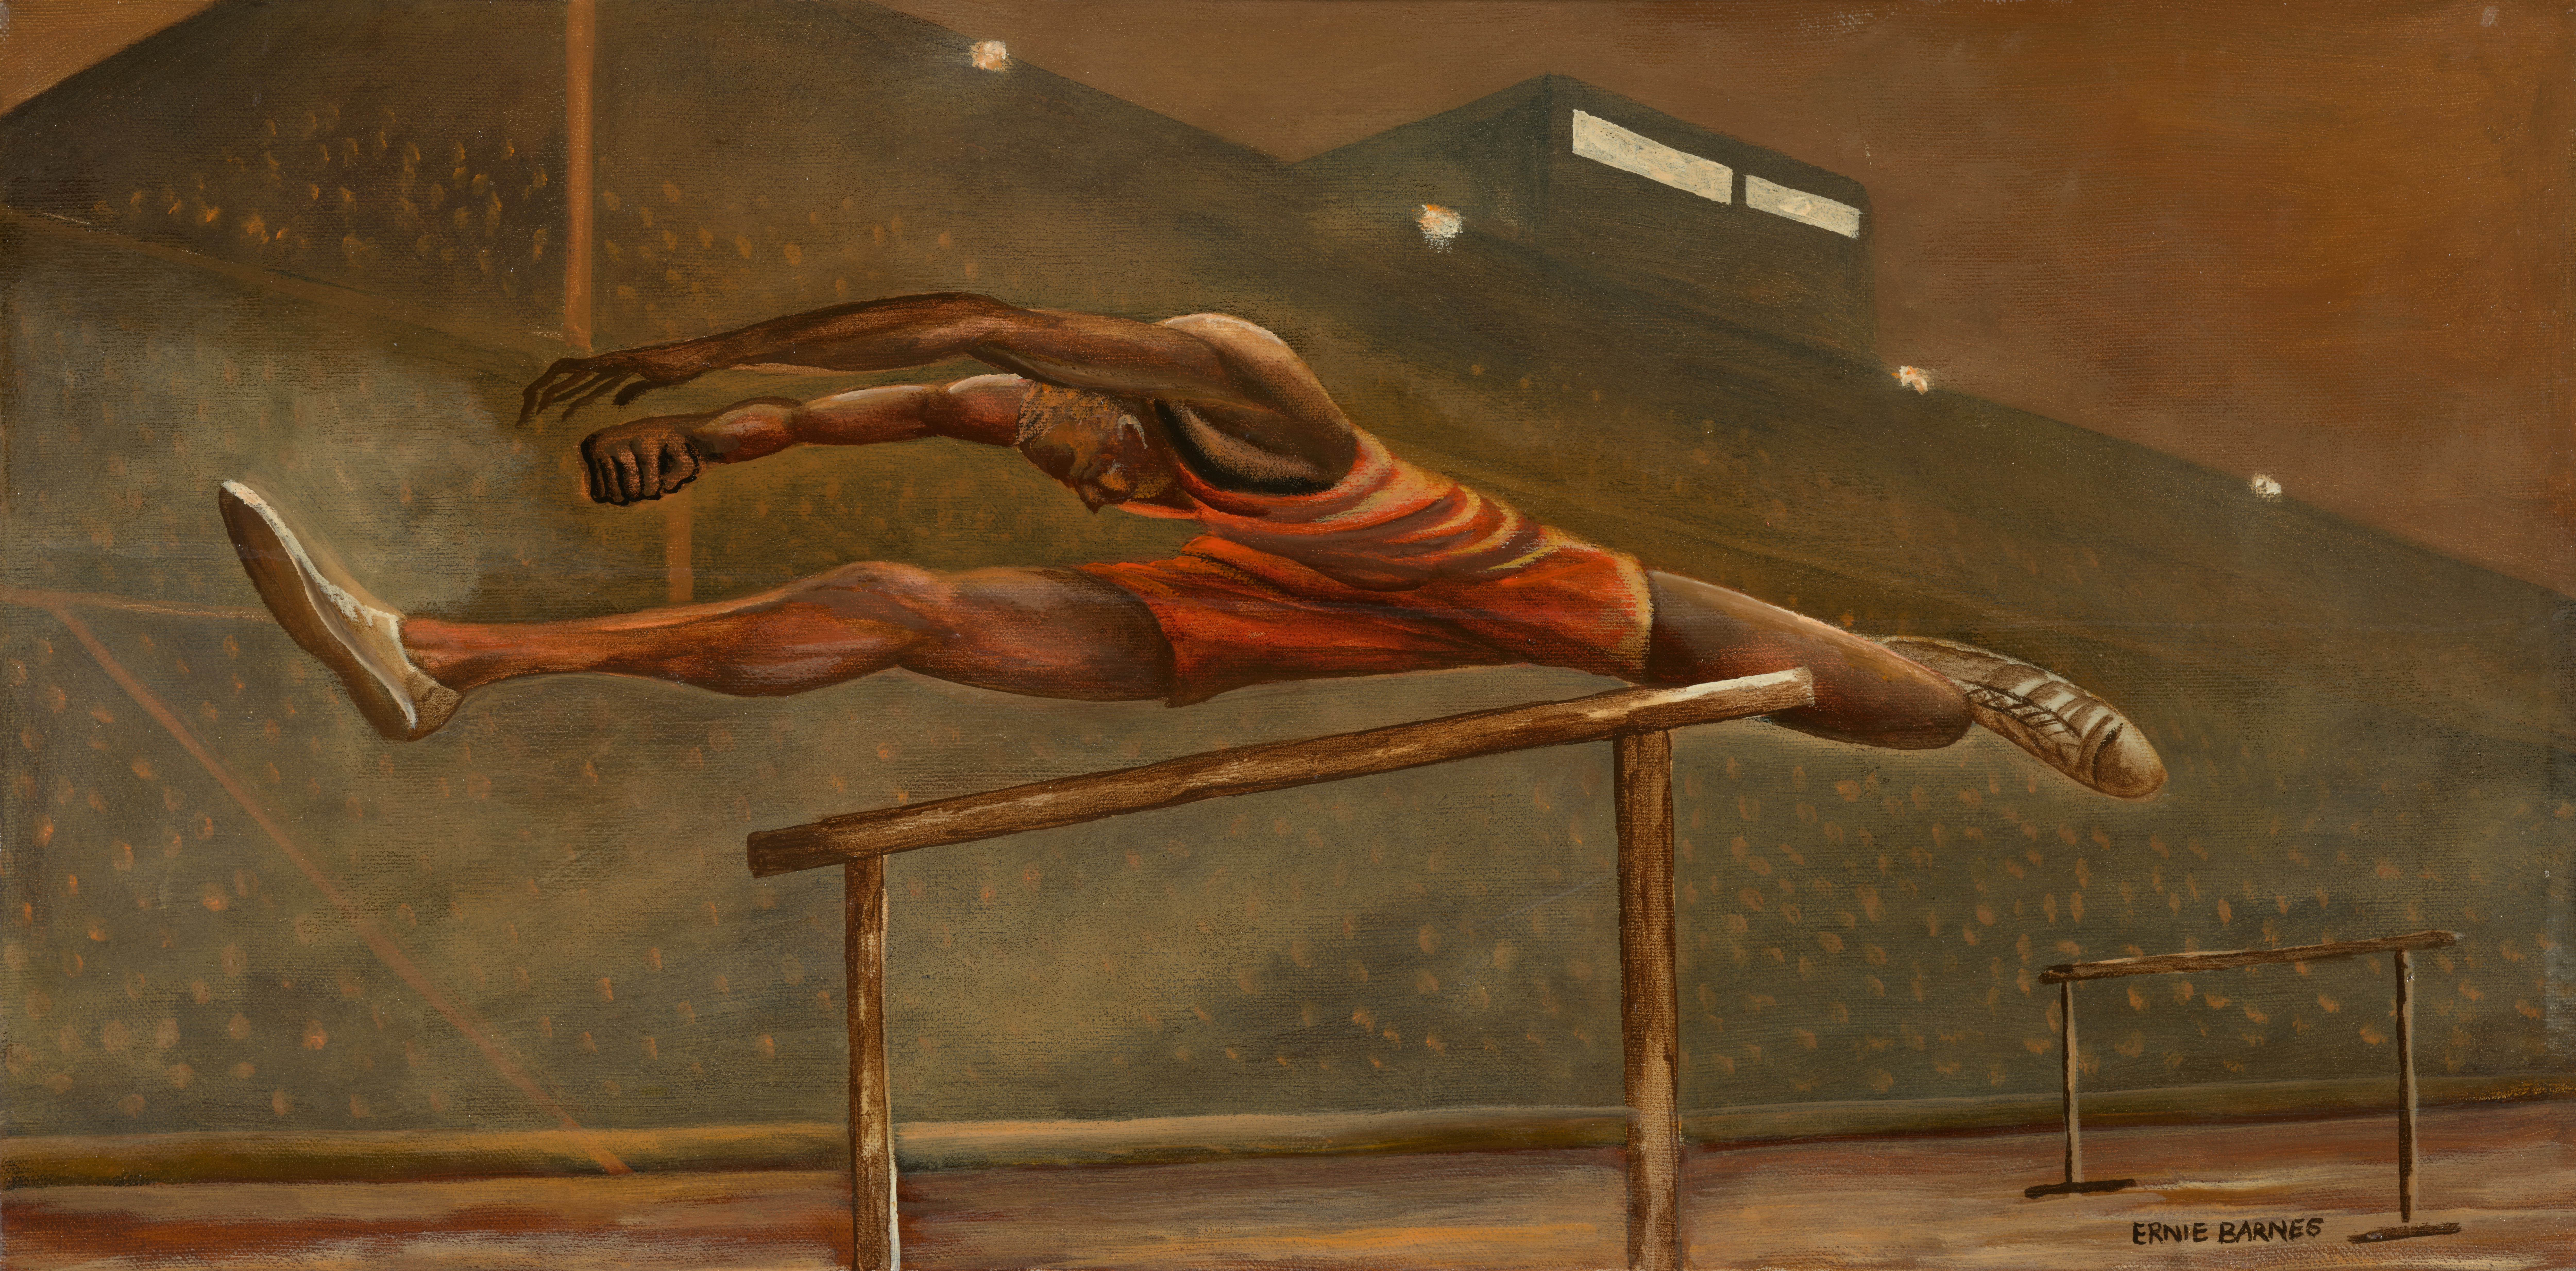 A painting of a Black male figure leaping over a hurdle in a stadium crowded with spectators. The athlete’s limbs are parallel to the ground and appear to be stretched beyond their limits. The athlete wears a red track uniform and black-and-white track shoes. Most of the painting is made up of brown and reddish brown tones.